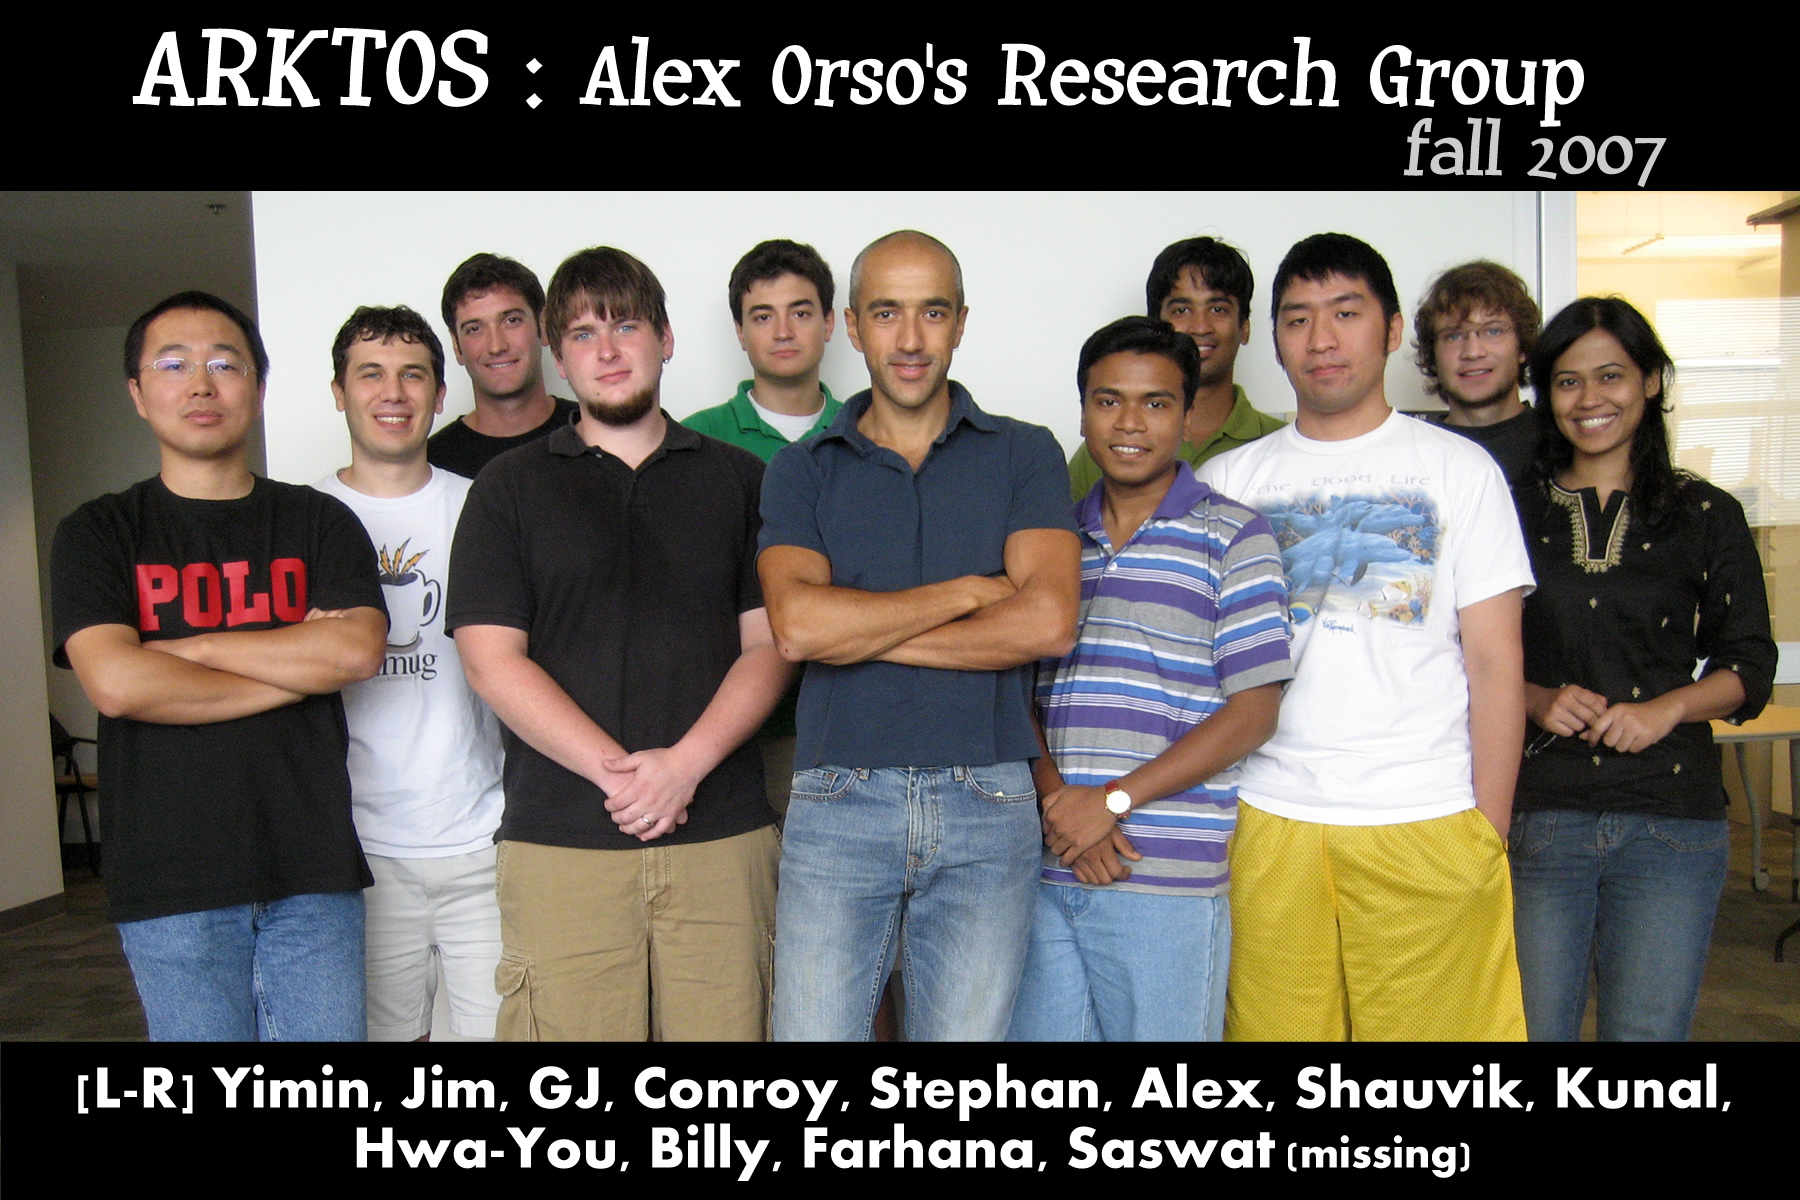 [Alex's research group]